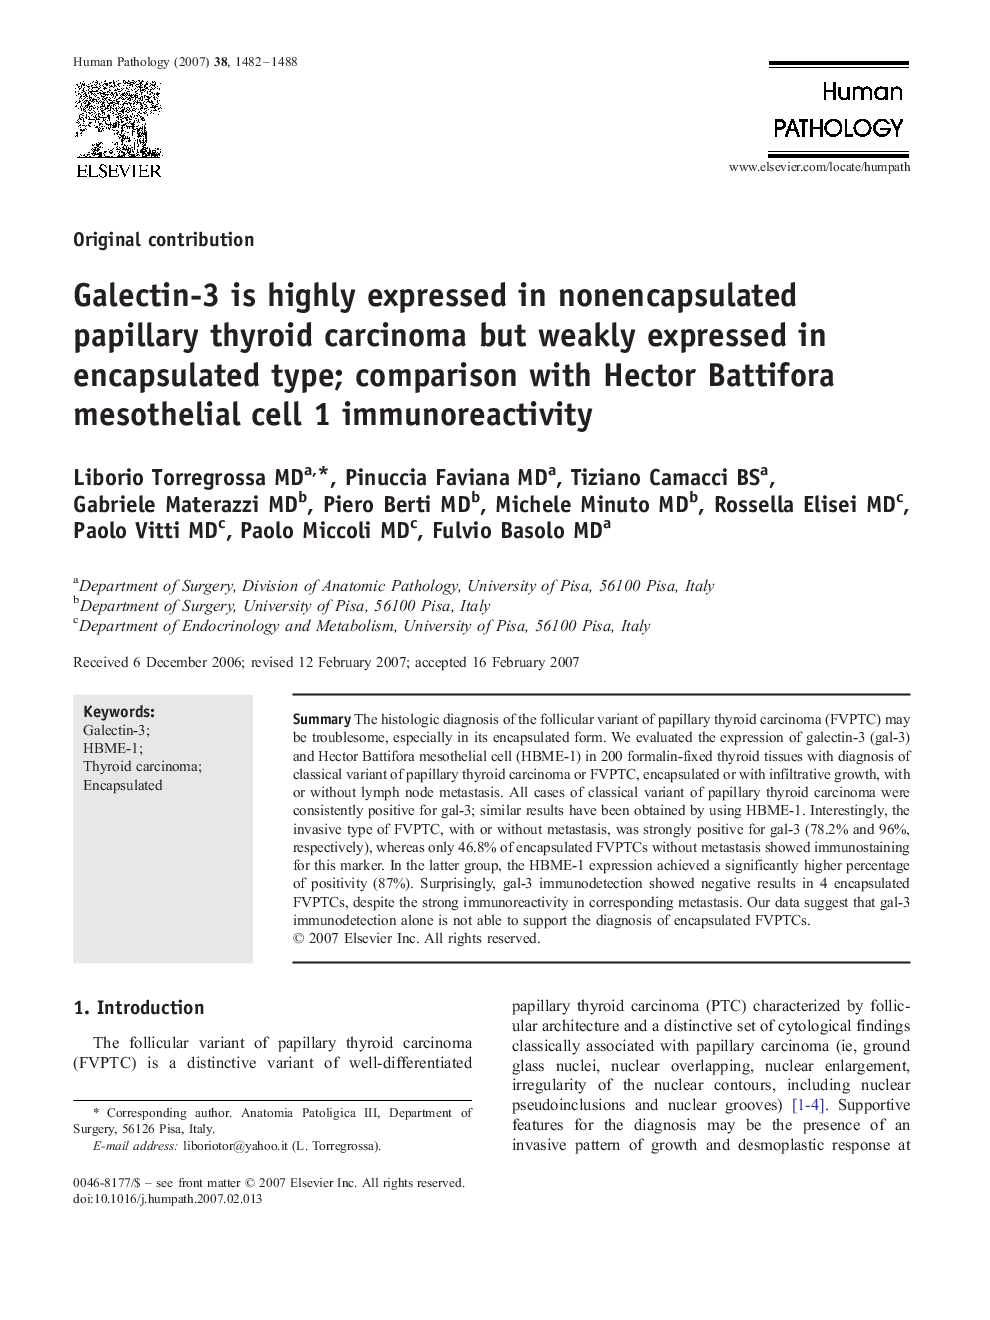 Galectin-3 is highly expressed in nonencapsulated papillary thyroid carcinoma but weakly expressed in encapsulated type; comparison with Hector Battifora mesothelial cell 1 immunoreactivity